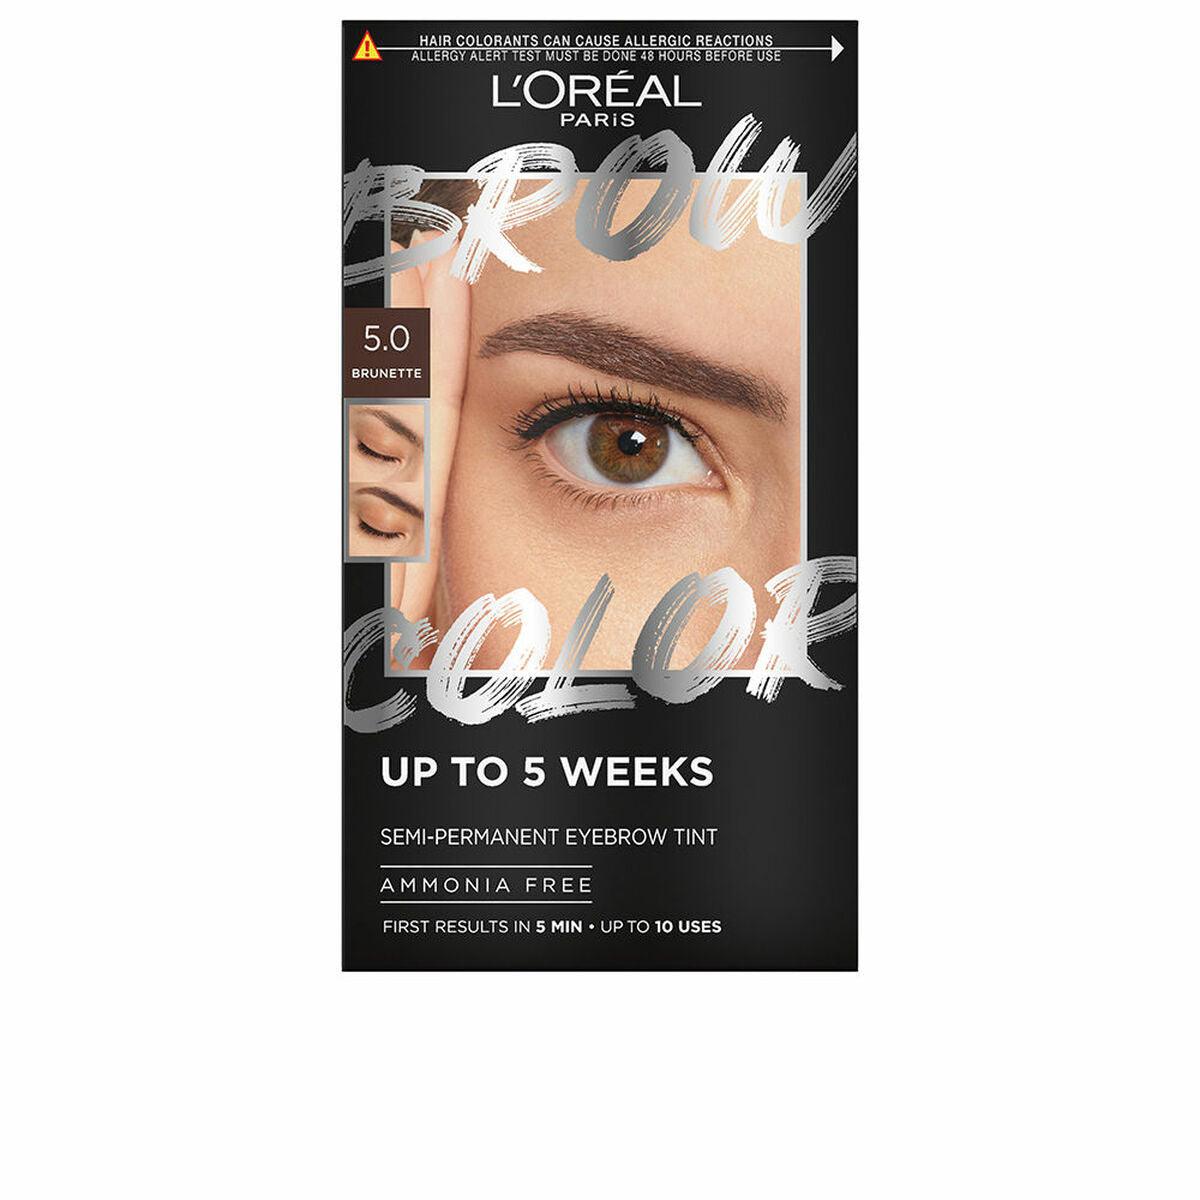 Eyebrow Tint L'Oreal Make Up BROW COLOR Nº 5.0 Brunette Semi-permanent 4 Pieces